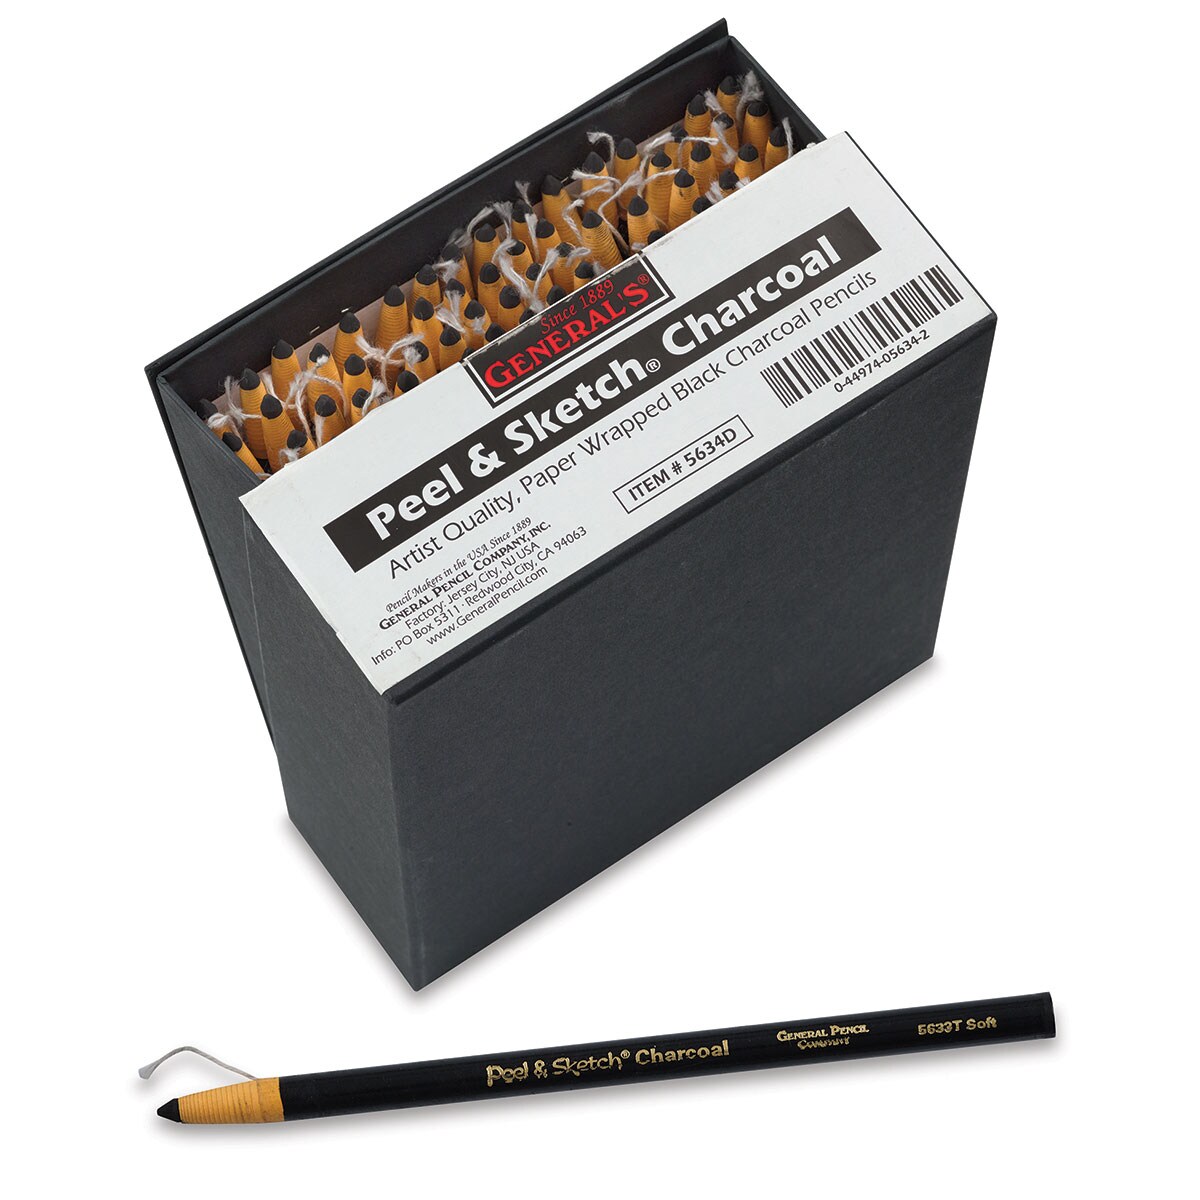 General&#x27;s Peel and Sketch Charcoal - Class Pack of 72